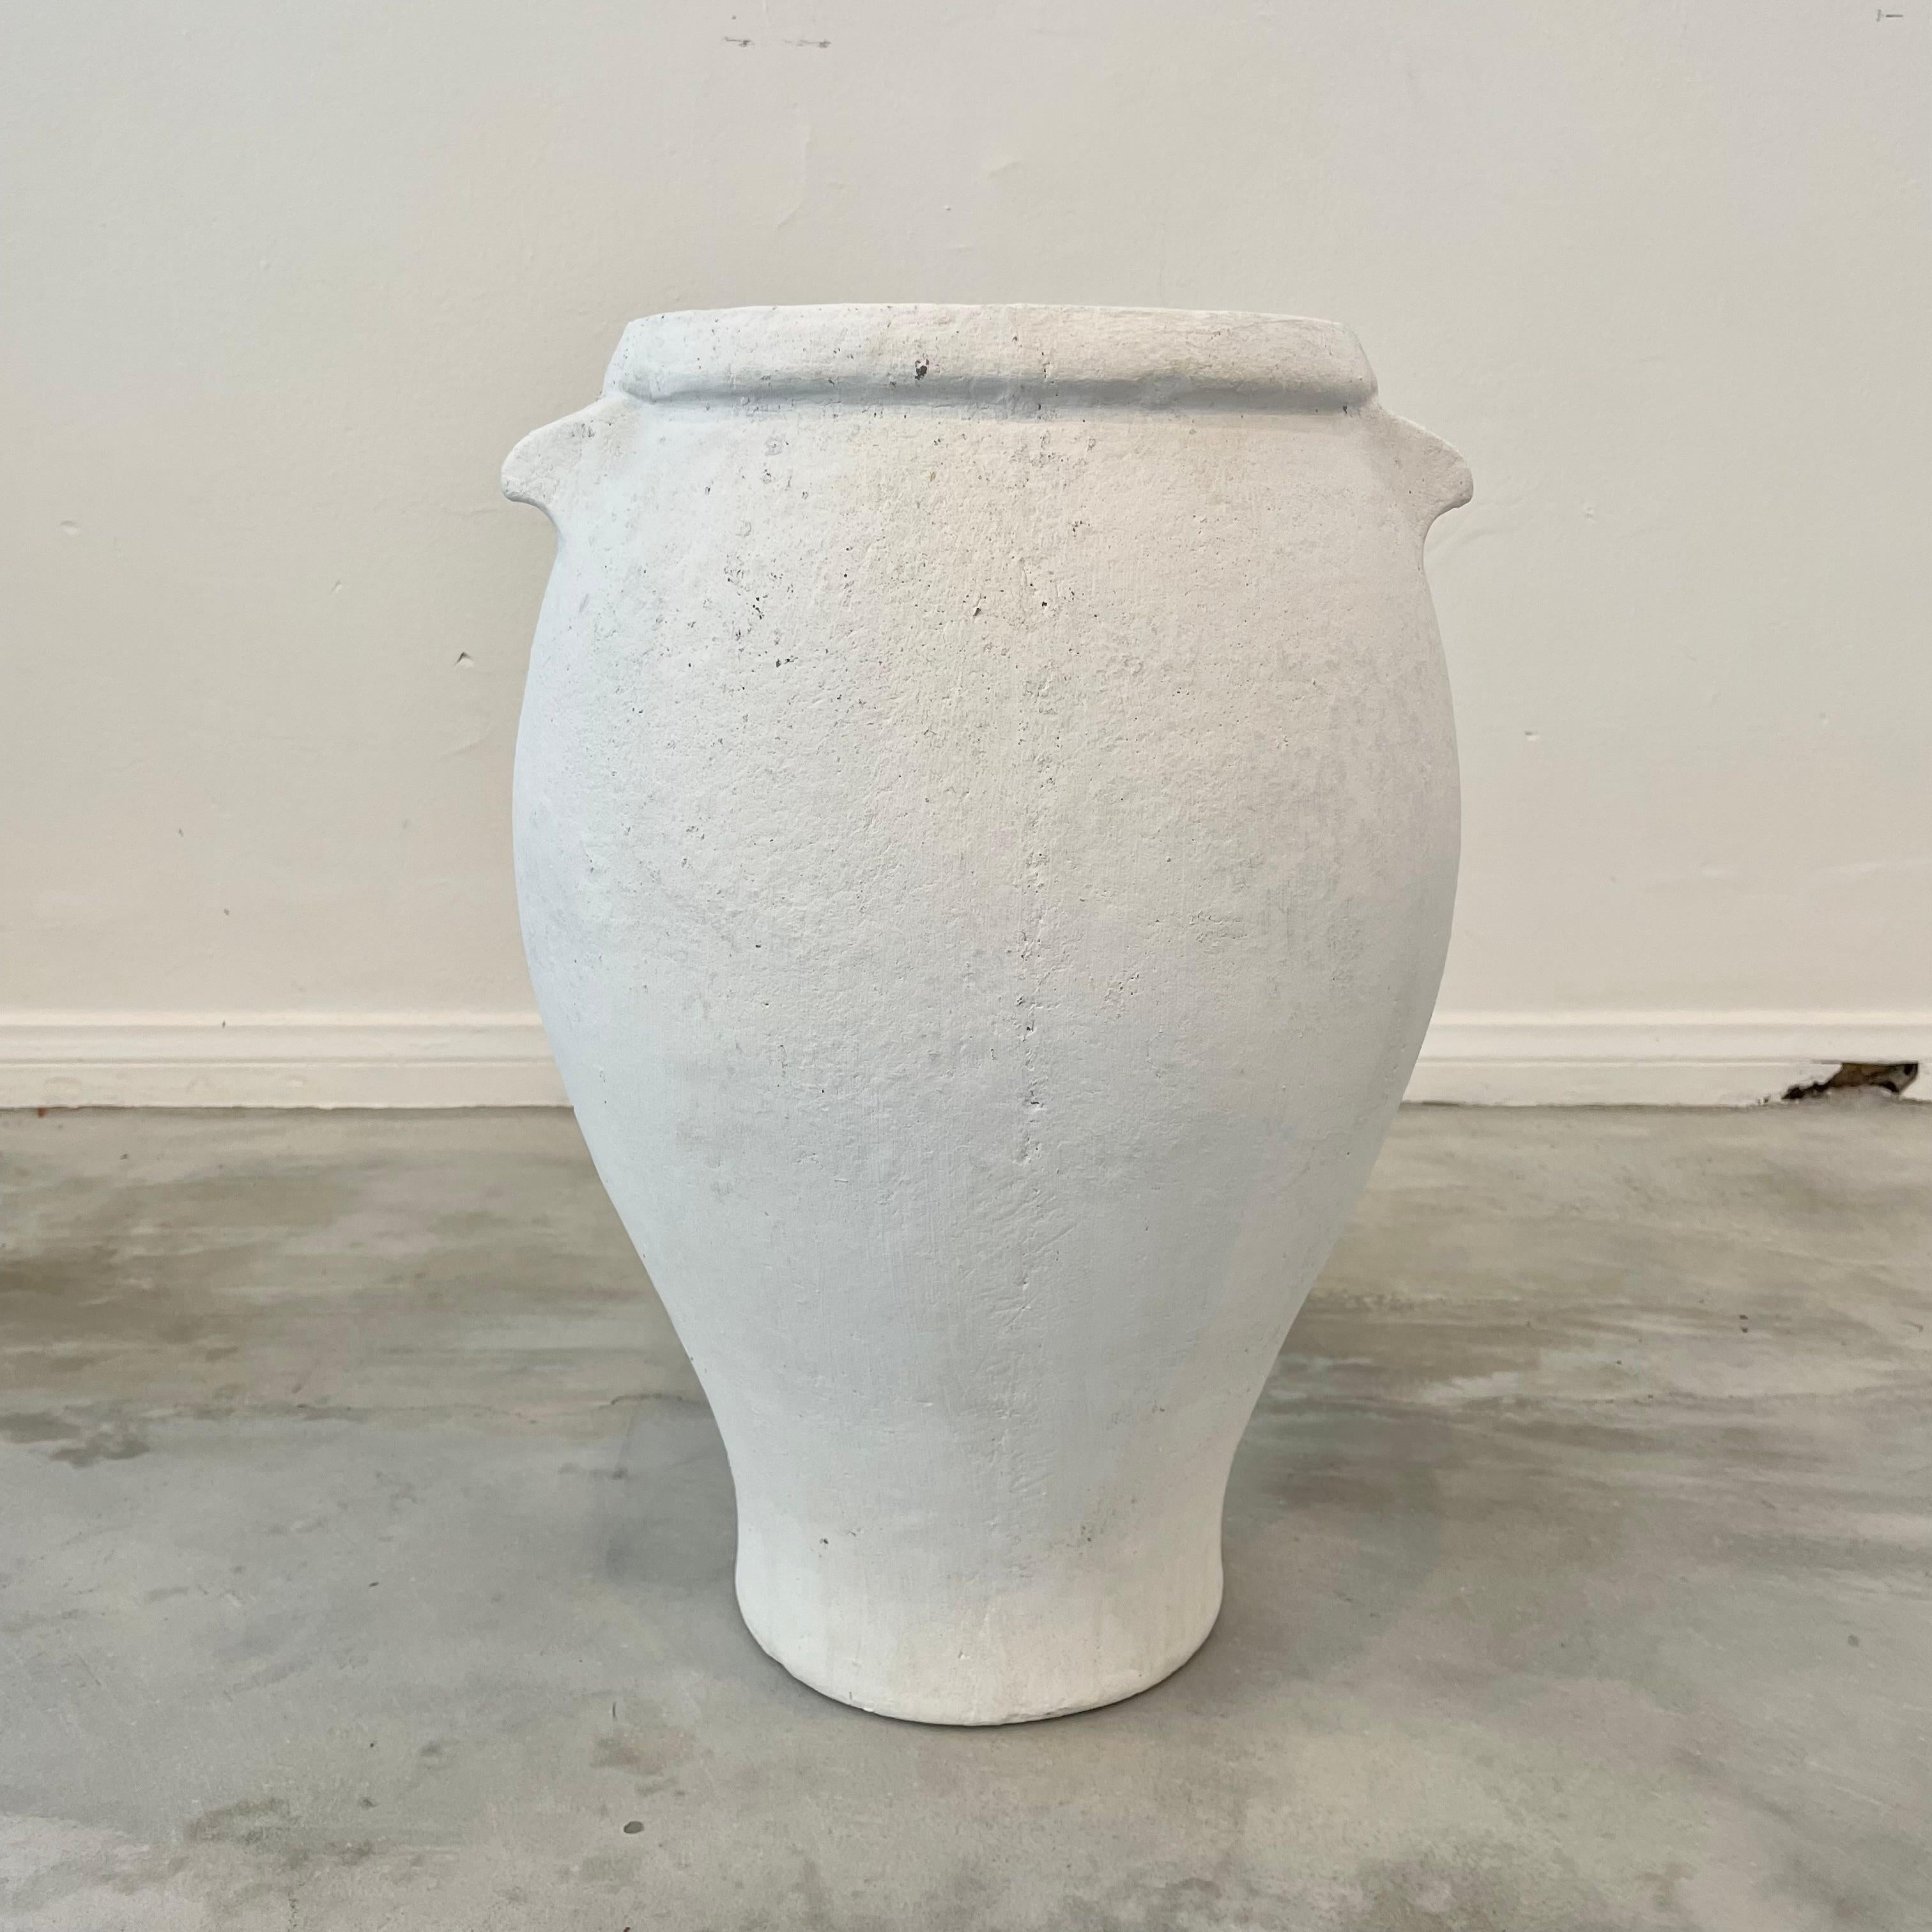 Willy Guhl Concrete Urn with Handles, 1960s Switzerland For Sale 2